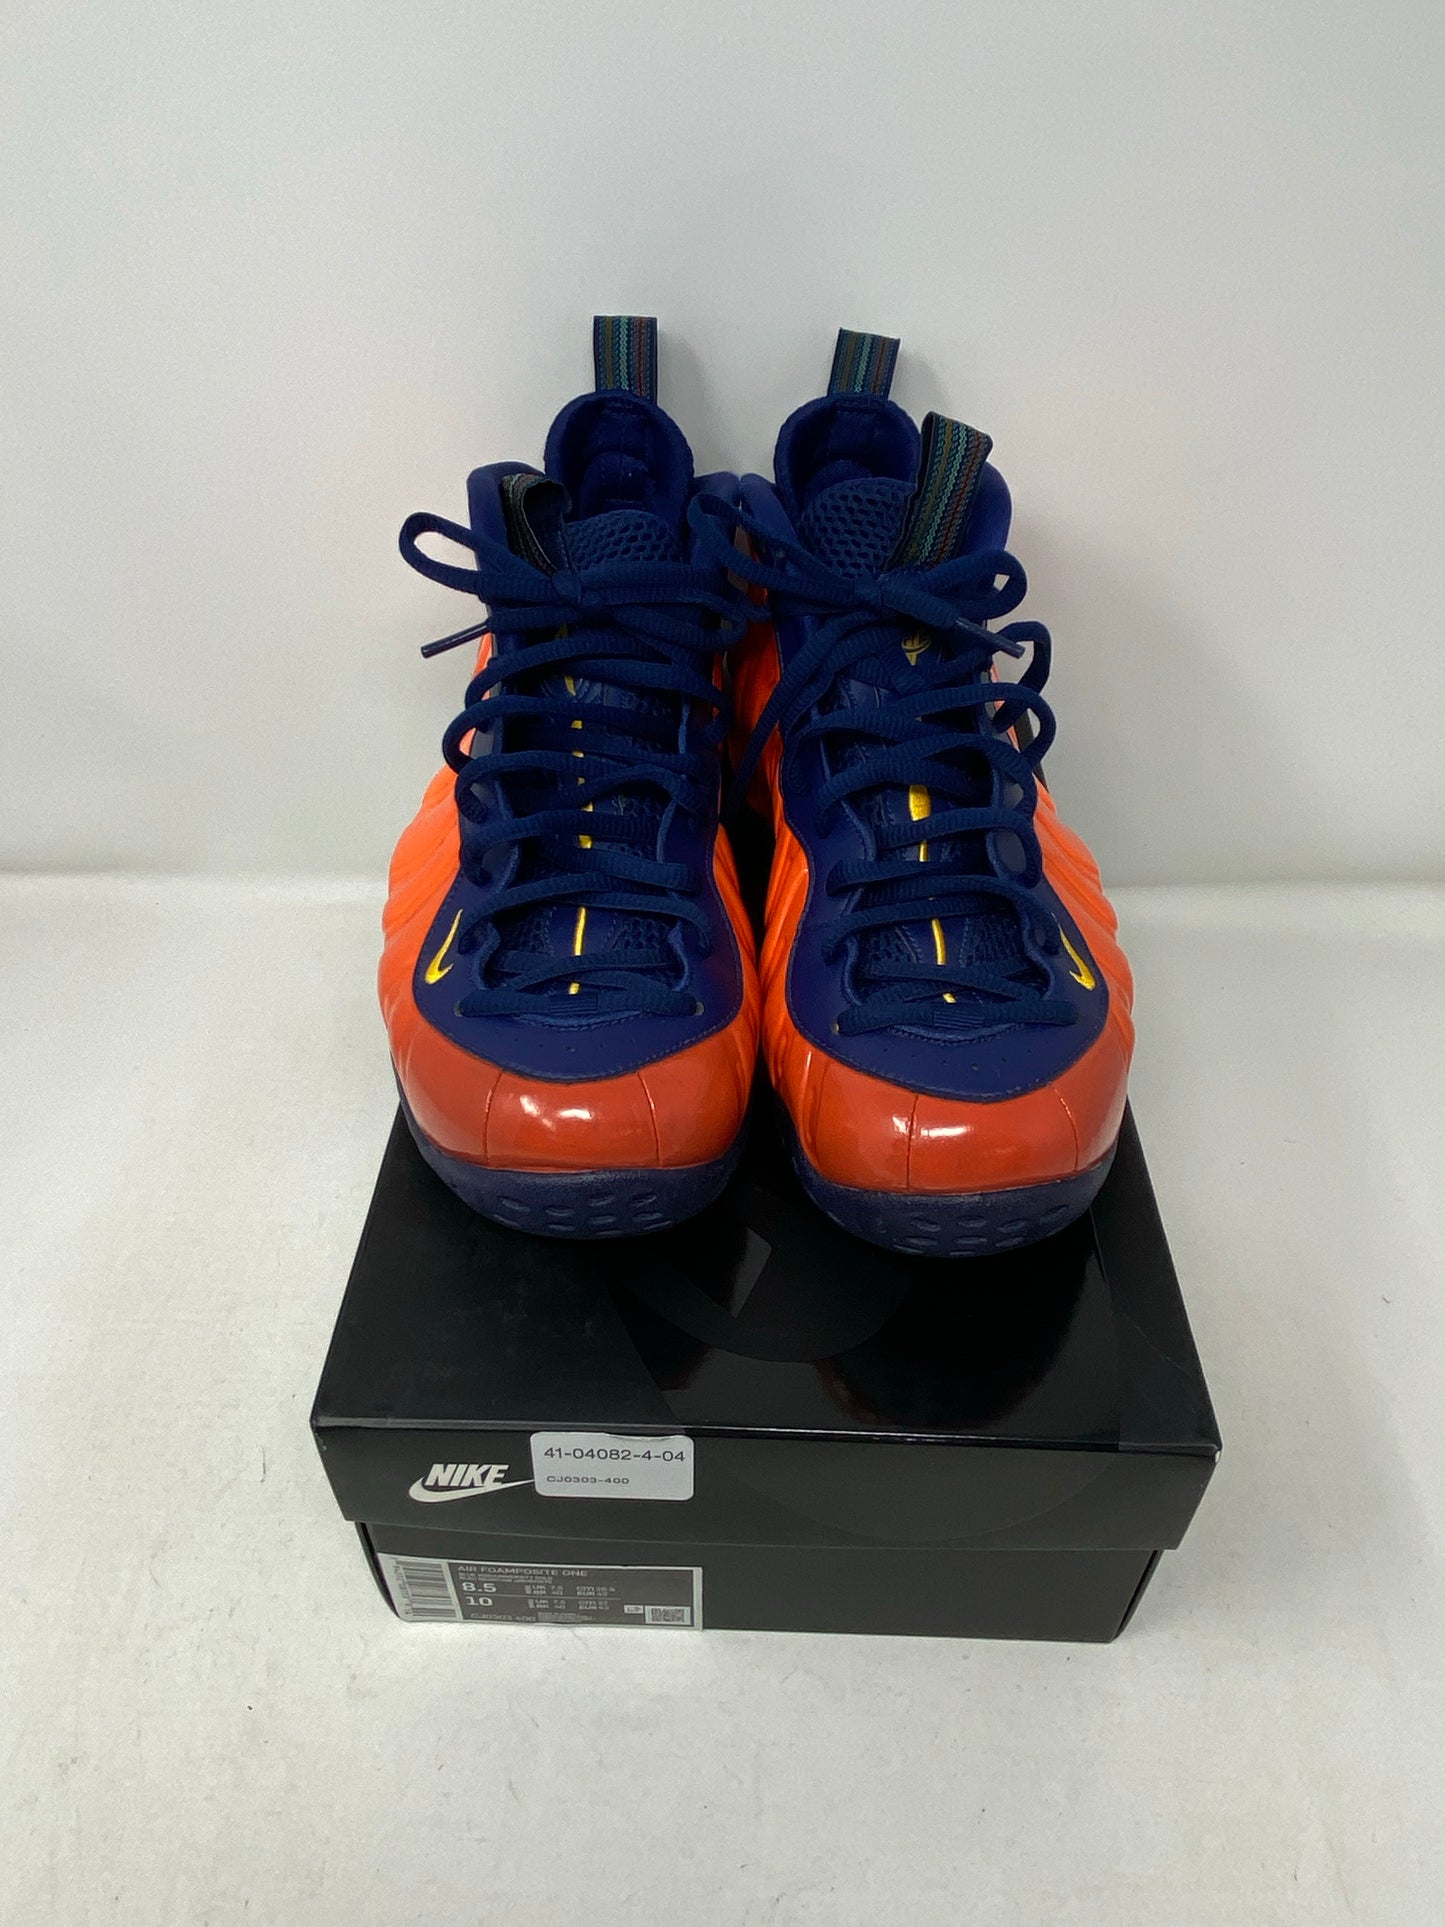 Preowned Air Foamposite One 'Rugged Orange' Sz 8.5